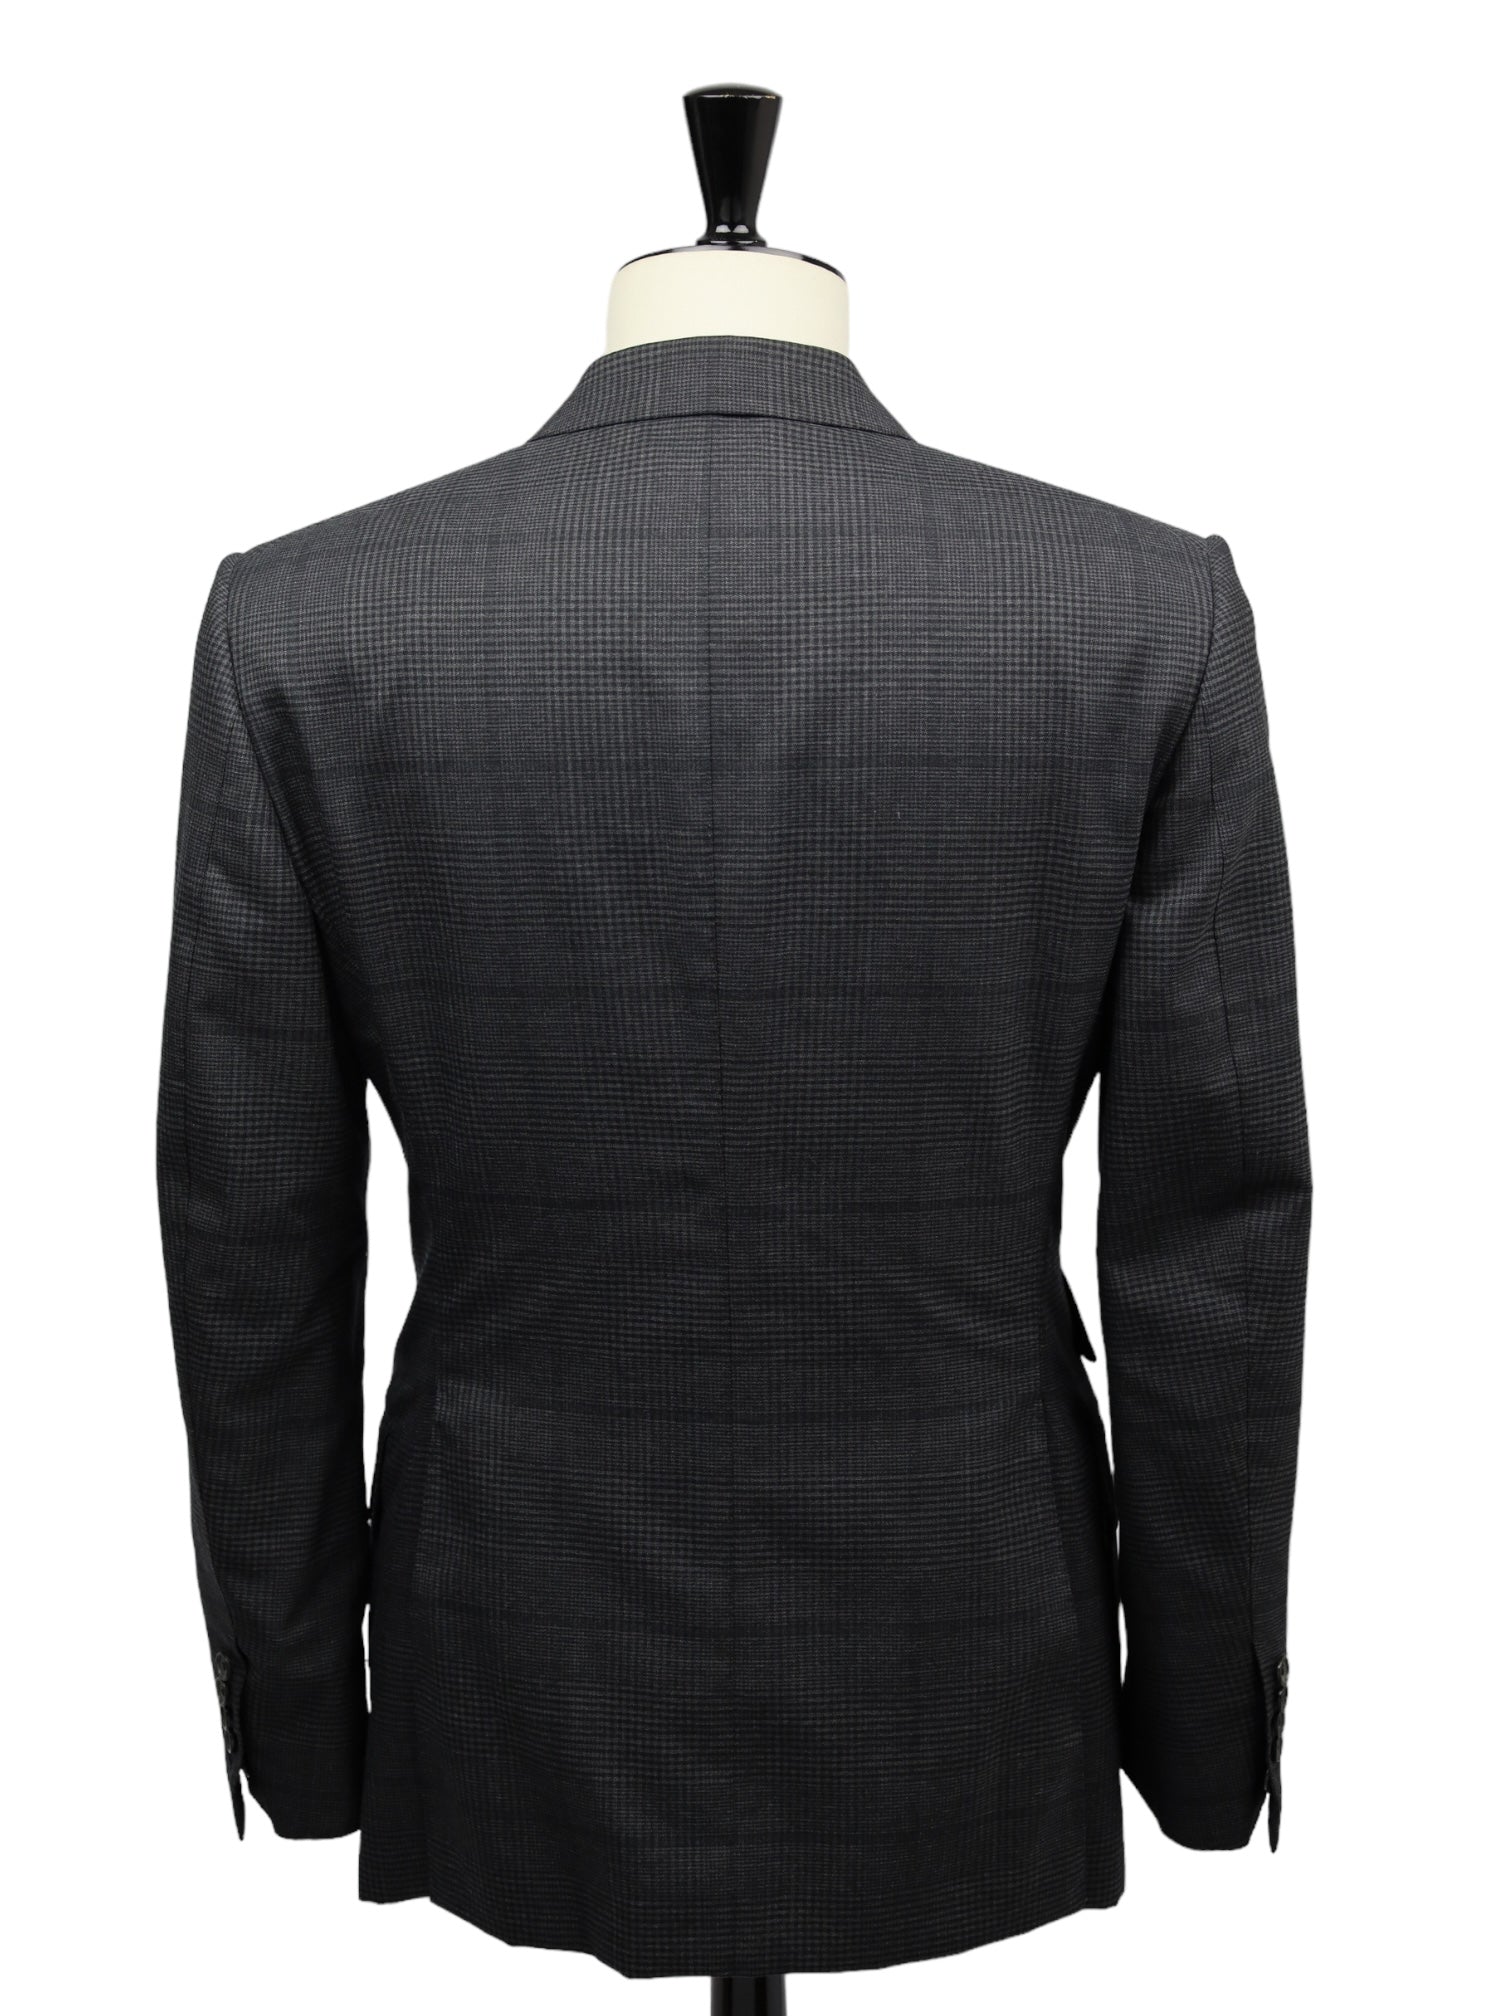 Tom Ford Grey Double Breasted Glenplaid Suit